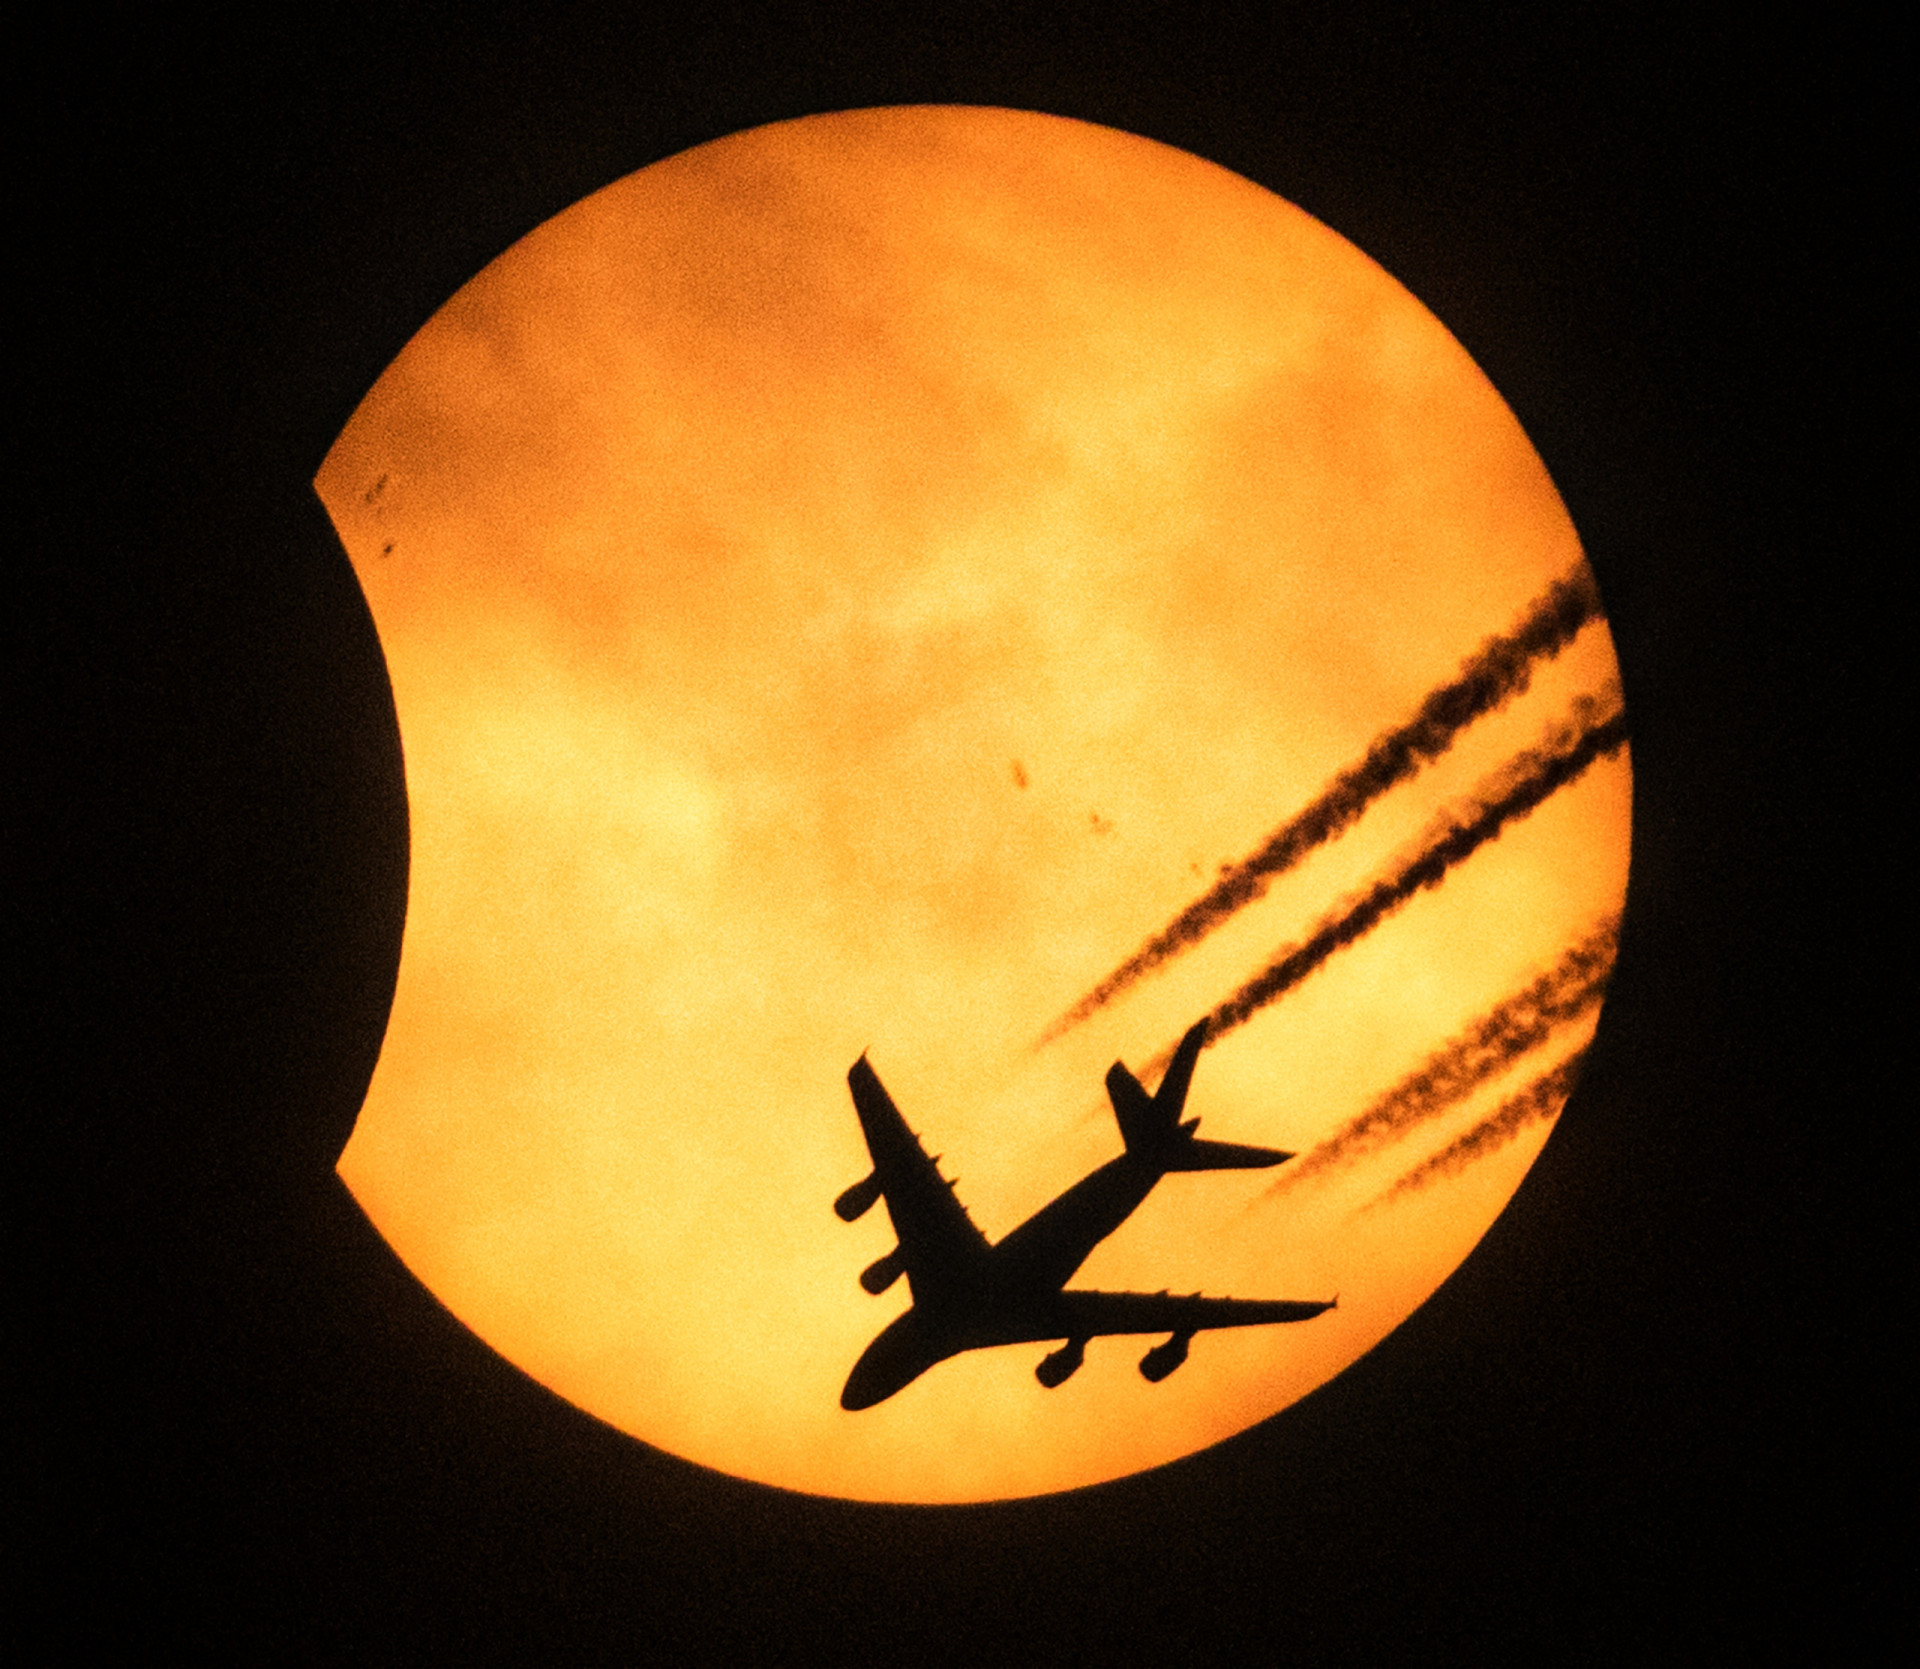 <p>And speaking of flying, the Federal Aviation Administration is warning of increased air traffic in the days leading up to April 8 and what it terms the "Great North American Eclipse."</p><p><a href="https://www.msn.com/en-ca/community/channel/vid-7xx8mnucu55yw63we9va2gwr7uihbxwc68fxqp25x6tg4ftibpra?cvid=94631541bc0f4f89bfd59158d696ad7e">Follow us and access great exclusive content every day</a></p>